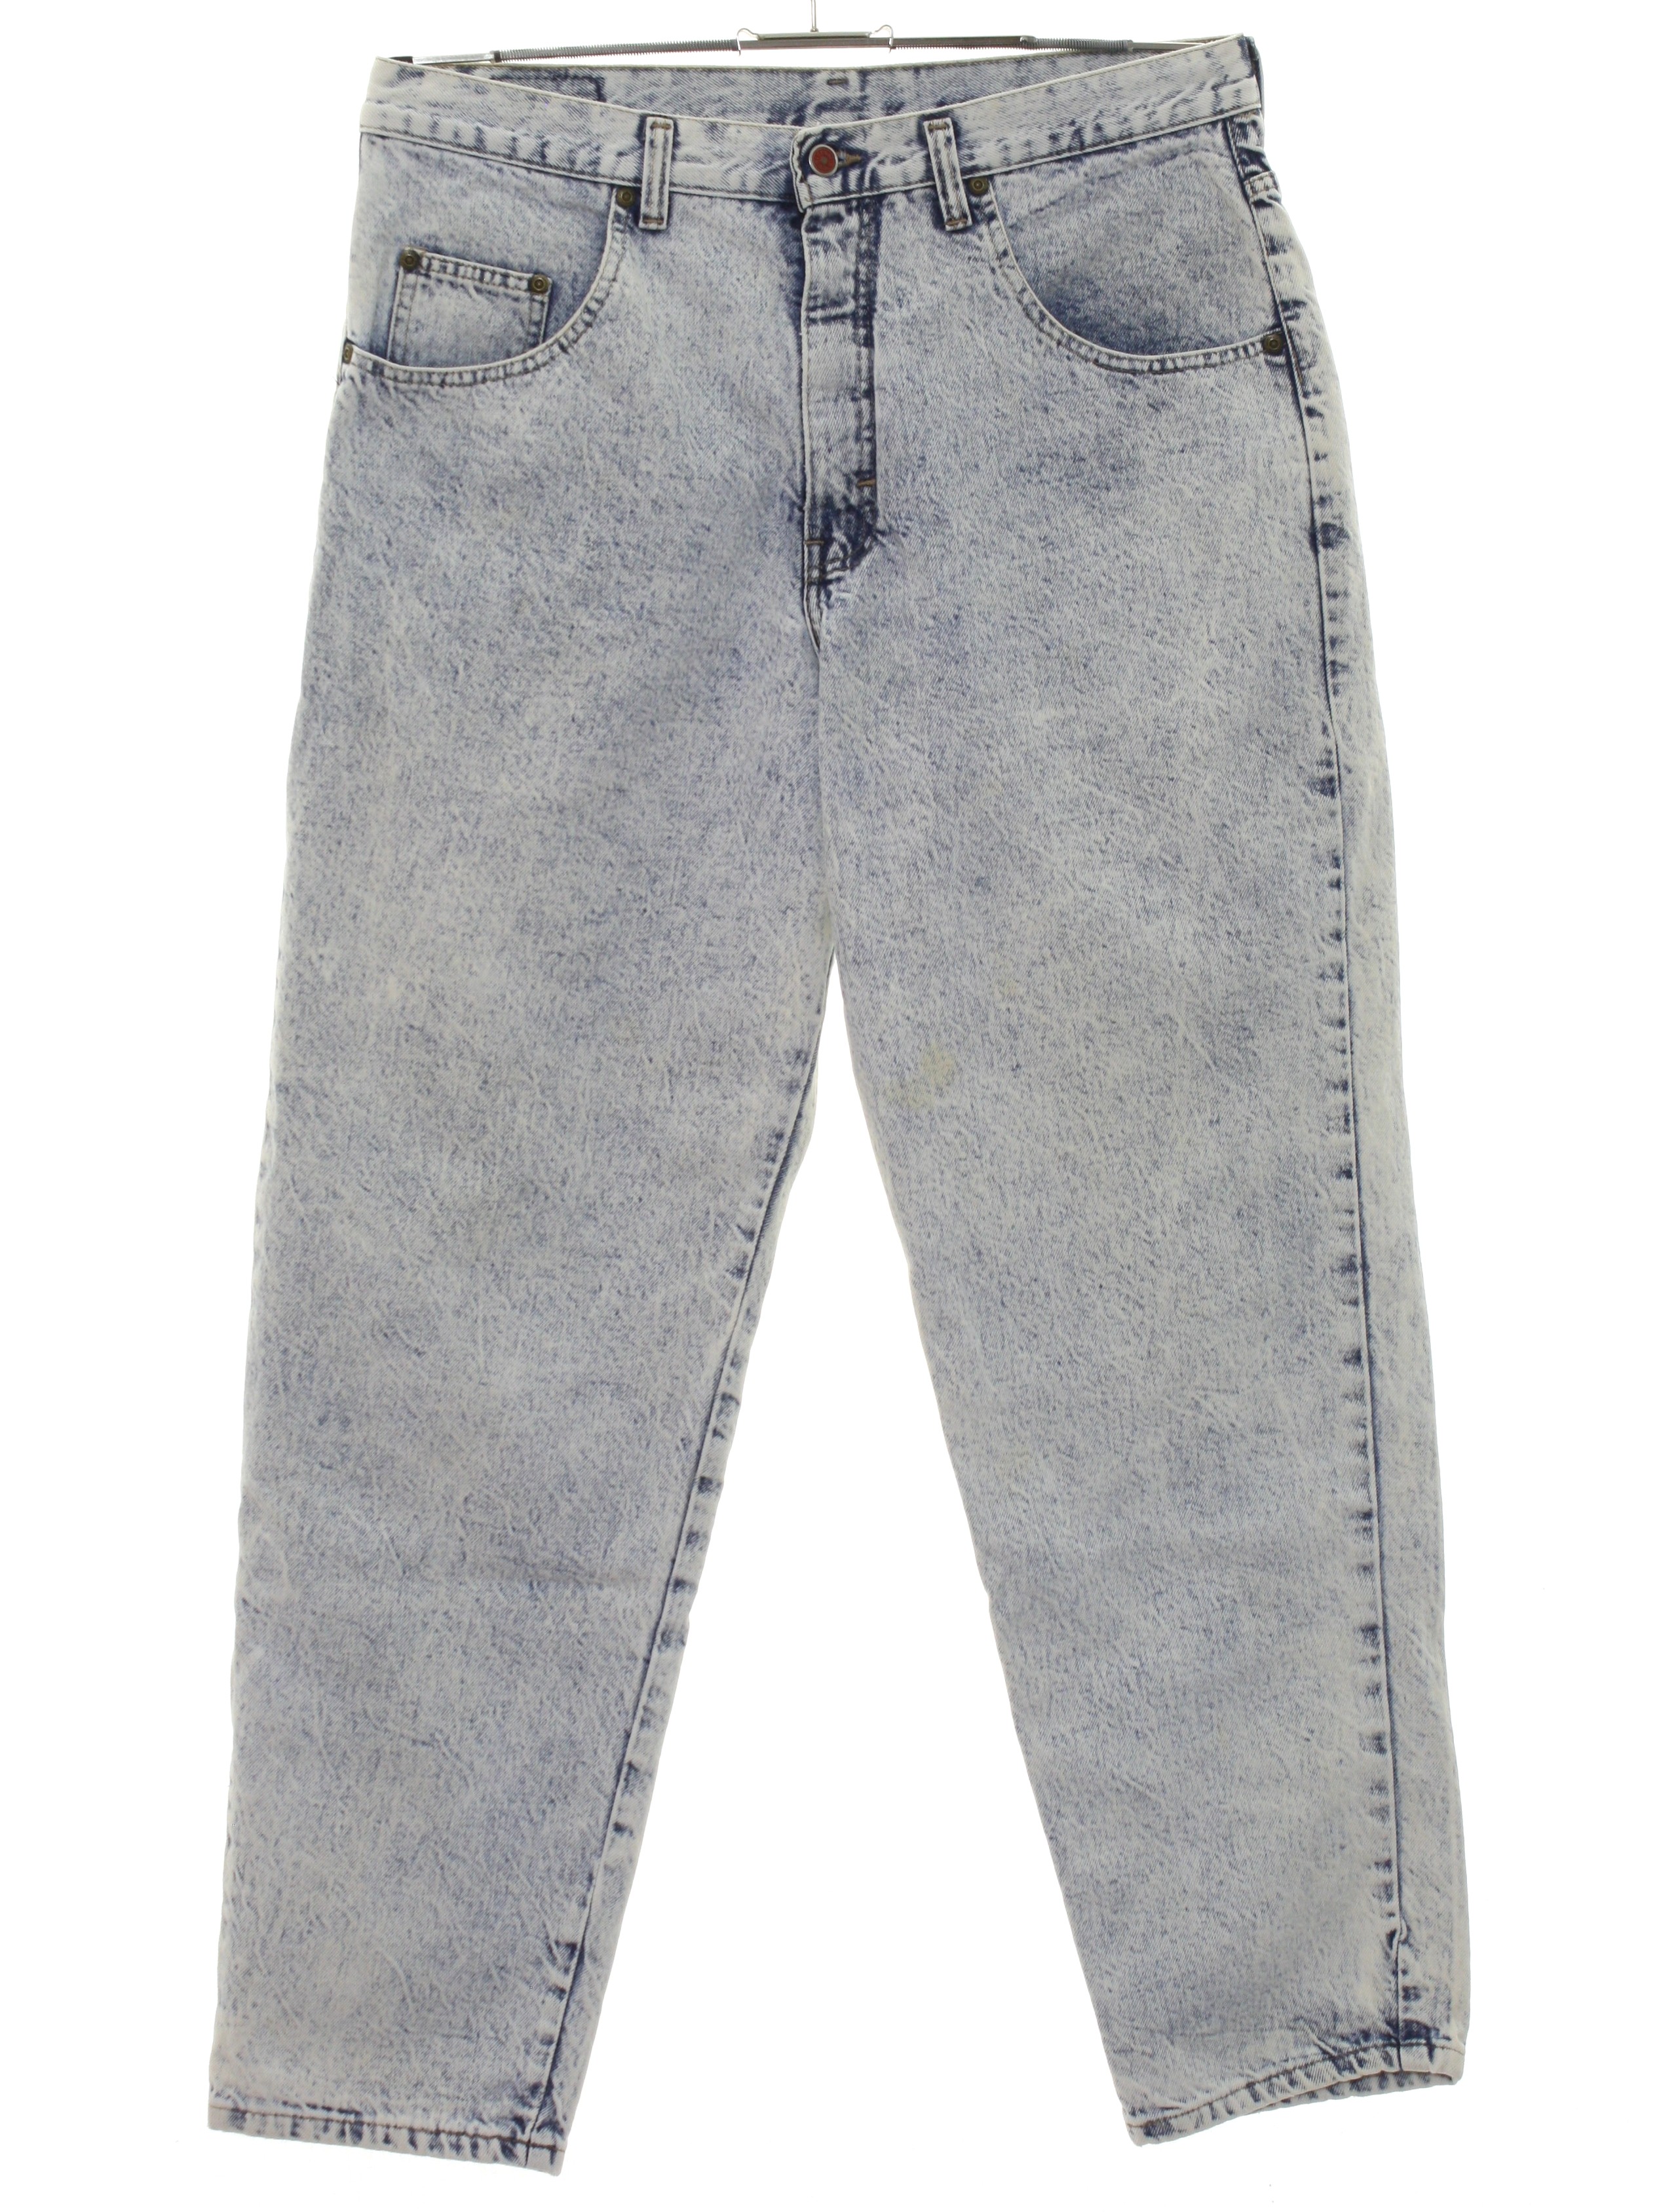 Retro 1980's Pants (Brittania) : Late 80s or early 90s -Brittania- Mens ...